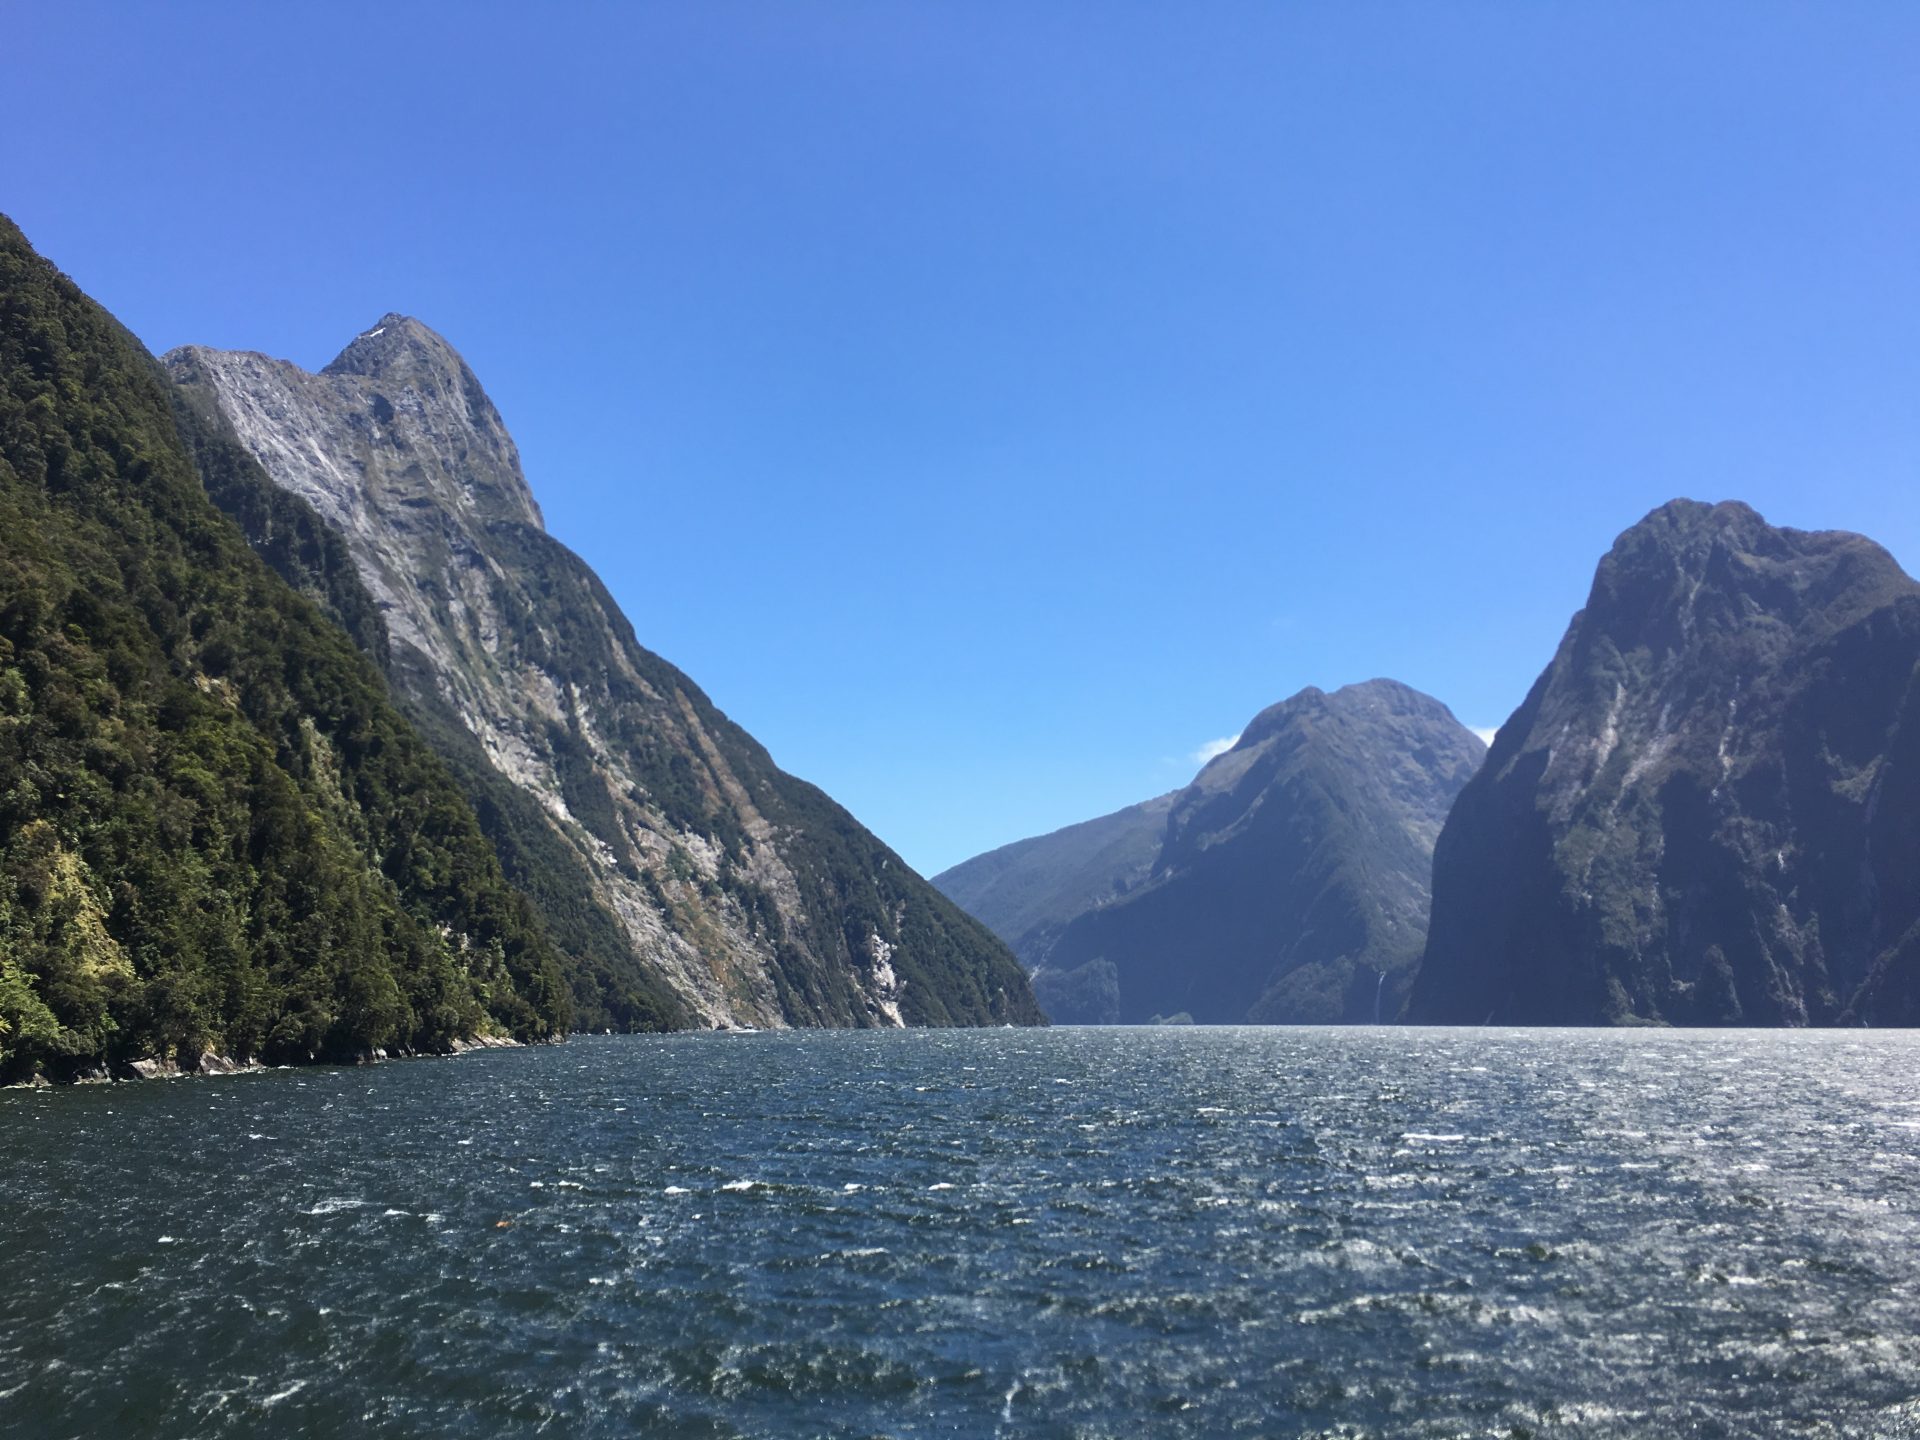 milford sound nz - Travel Contests: September 1st, 2021 - New Zealand, Manchester, Florida, & more